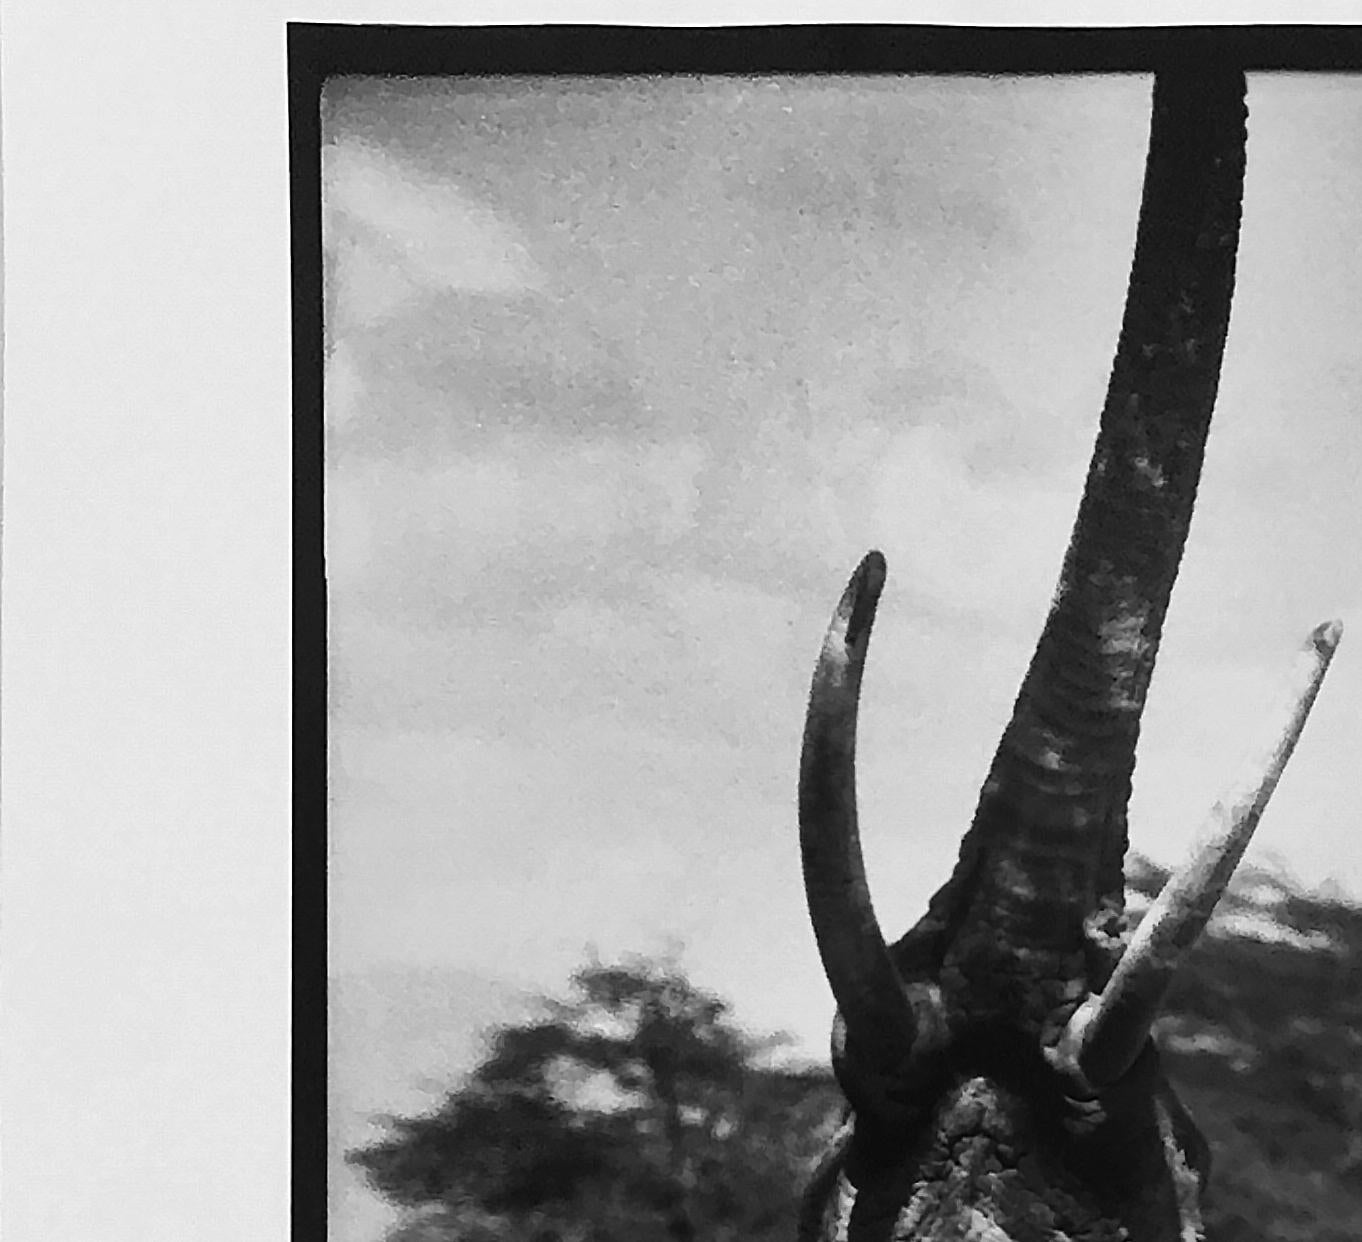 Charge Déléphant
Elephant reaching for the last branch on a tree, Kenya, 1965
Peter Beard/Unsigned
The original photograph unsigned but documented by its inclusion in 